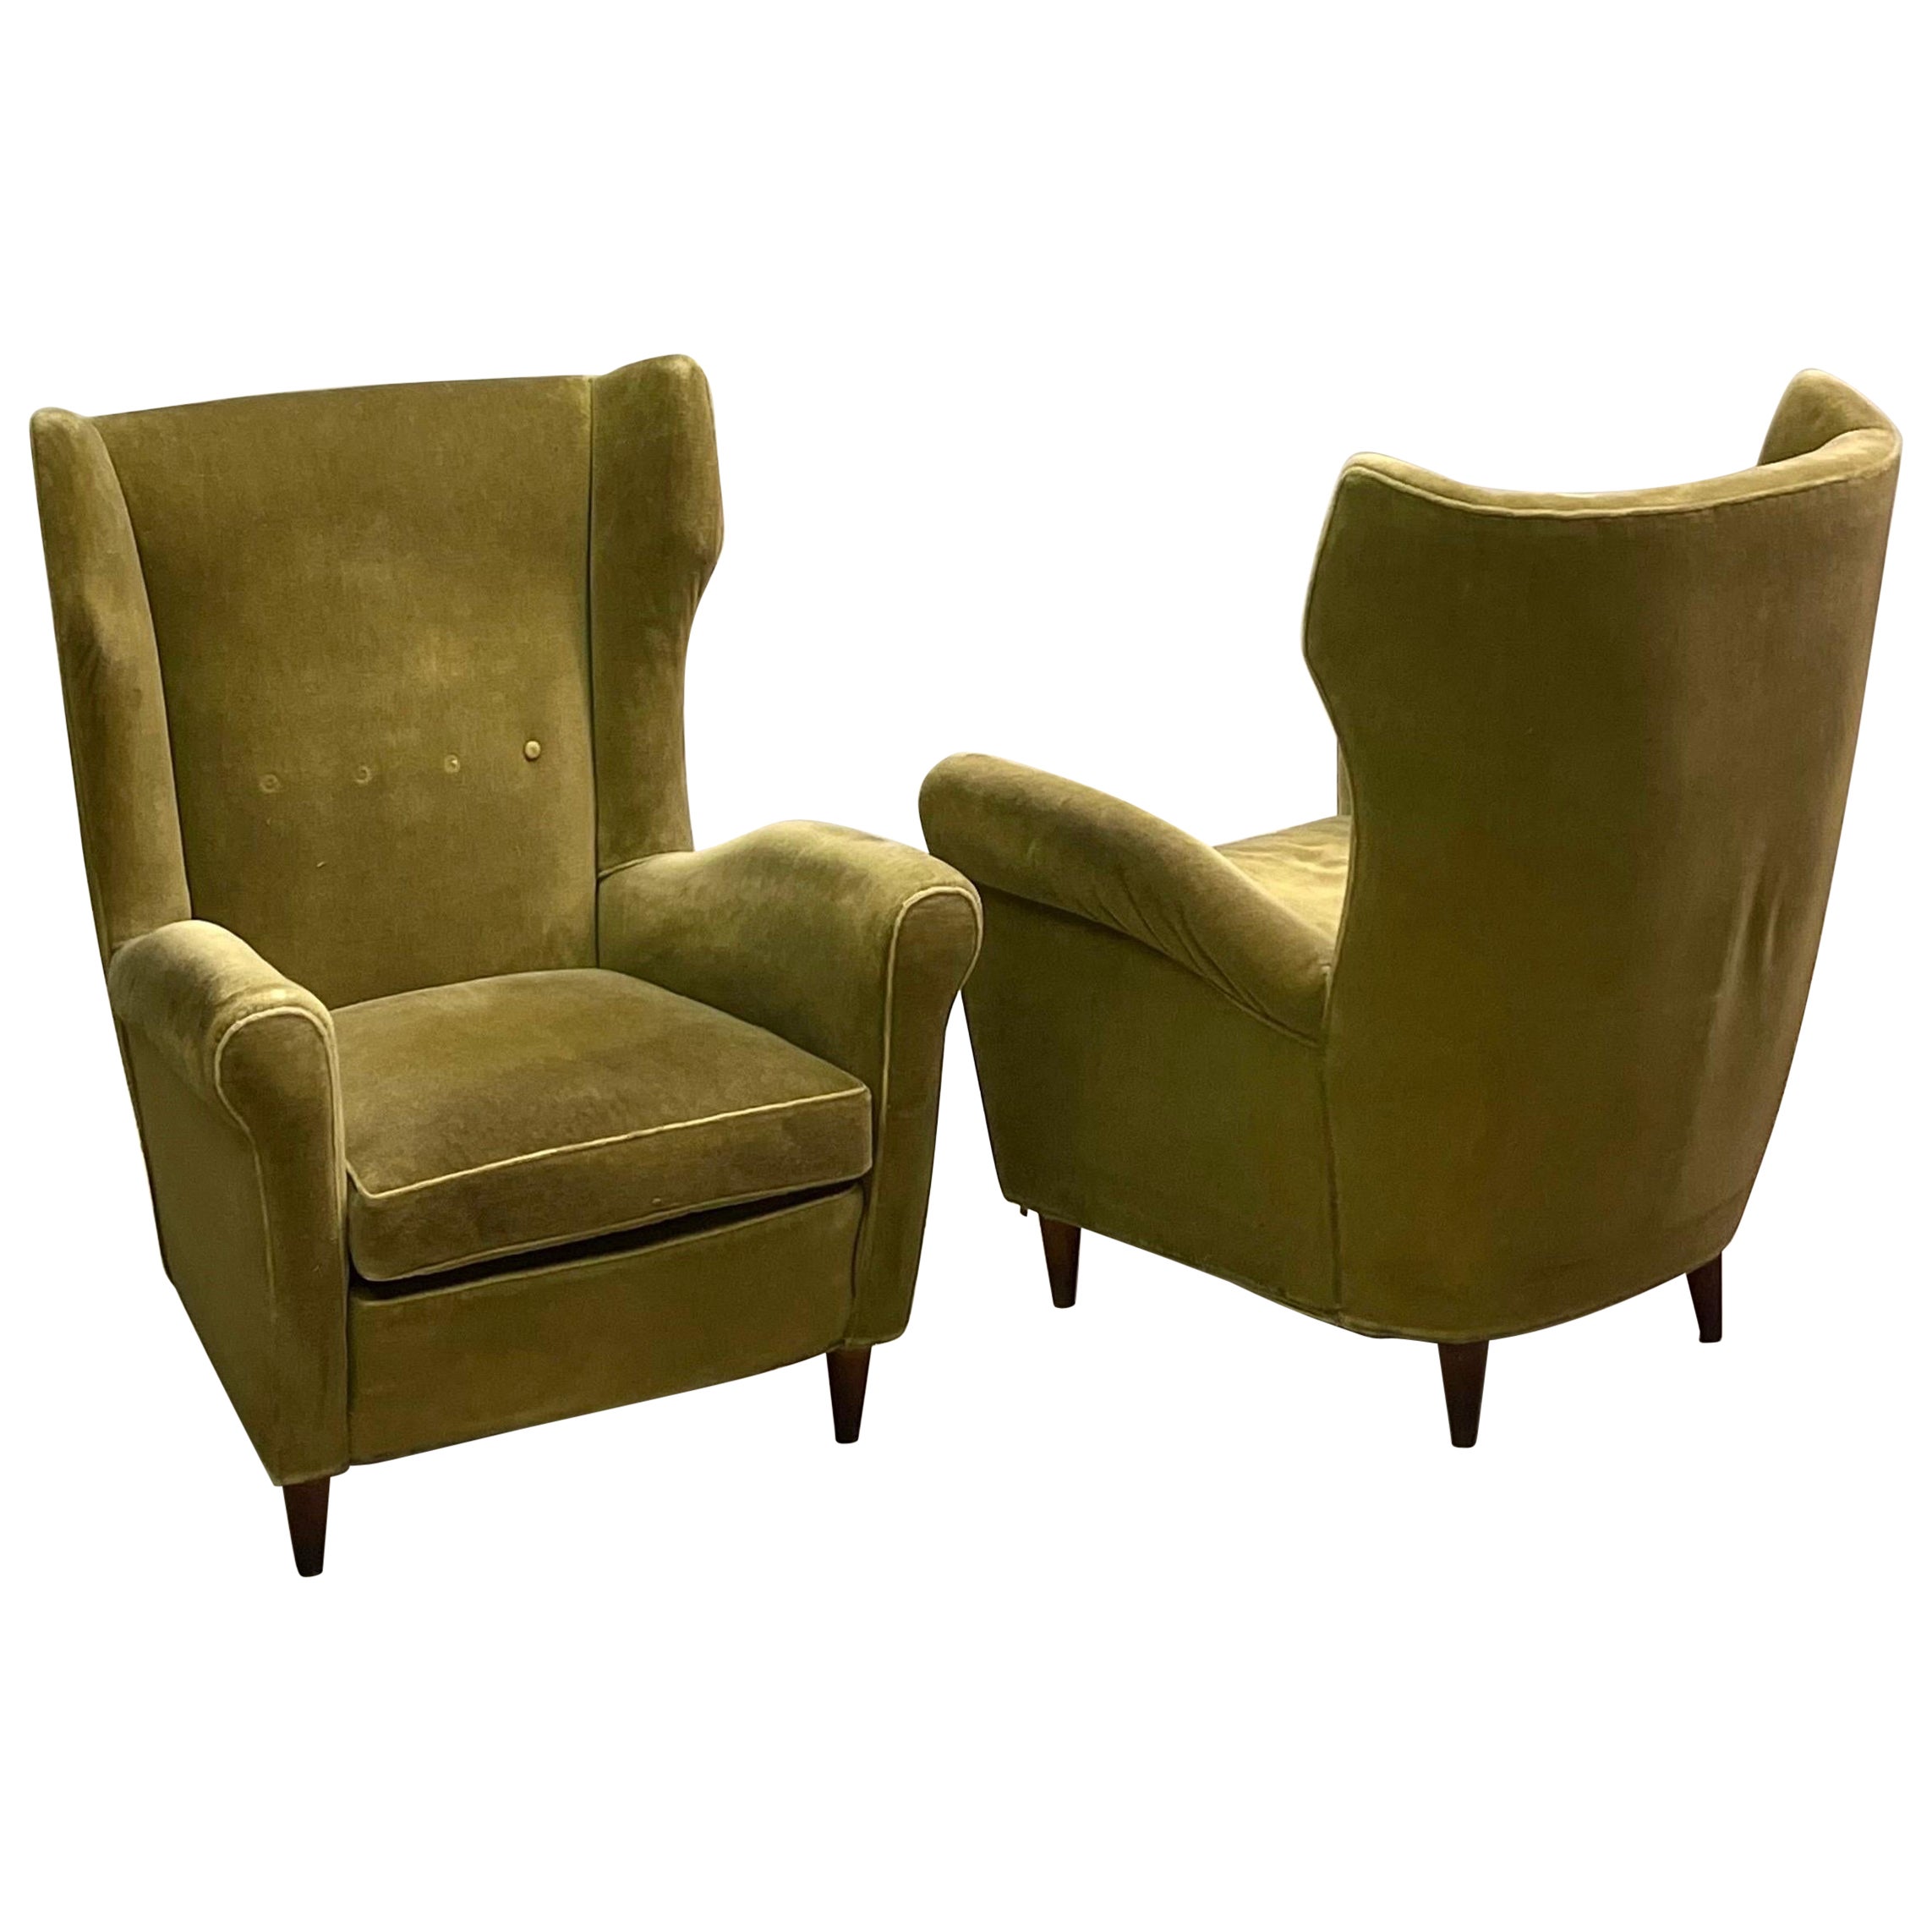 Pair of Italian Mid-Century Wingback Lounge Chairs Attr. to Gio Ponti, Model 512 For Sale